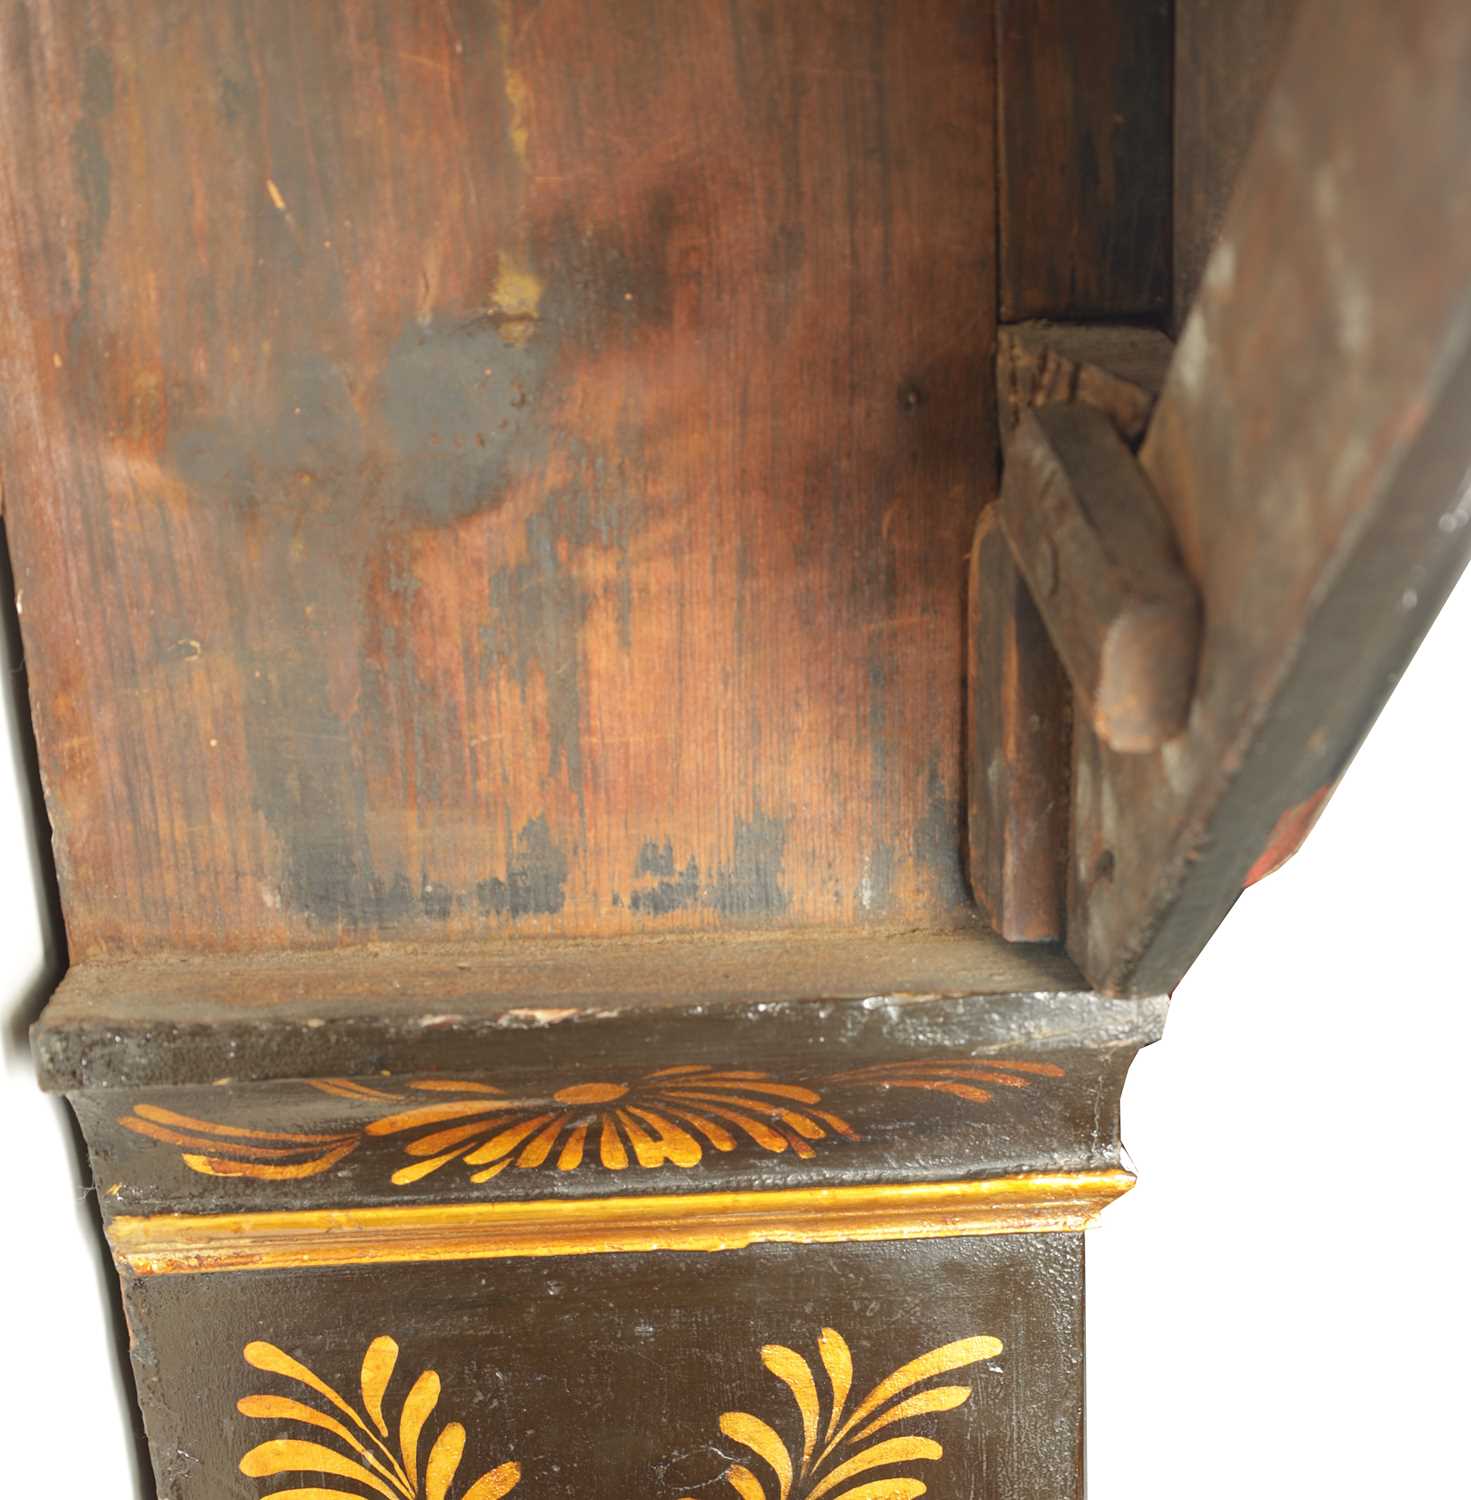 JOHN TICKELL, CREDITON. A RARE EARLY 18TH CENTURY LACQUERED CHINOISERIE TAVERN CLOCK OF LARGE SIZE - Image 12 of 21